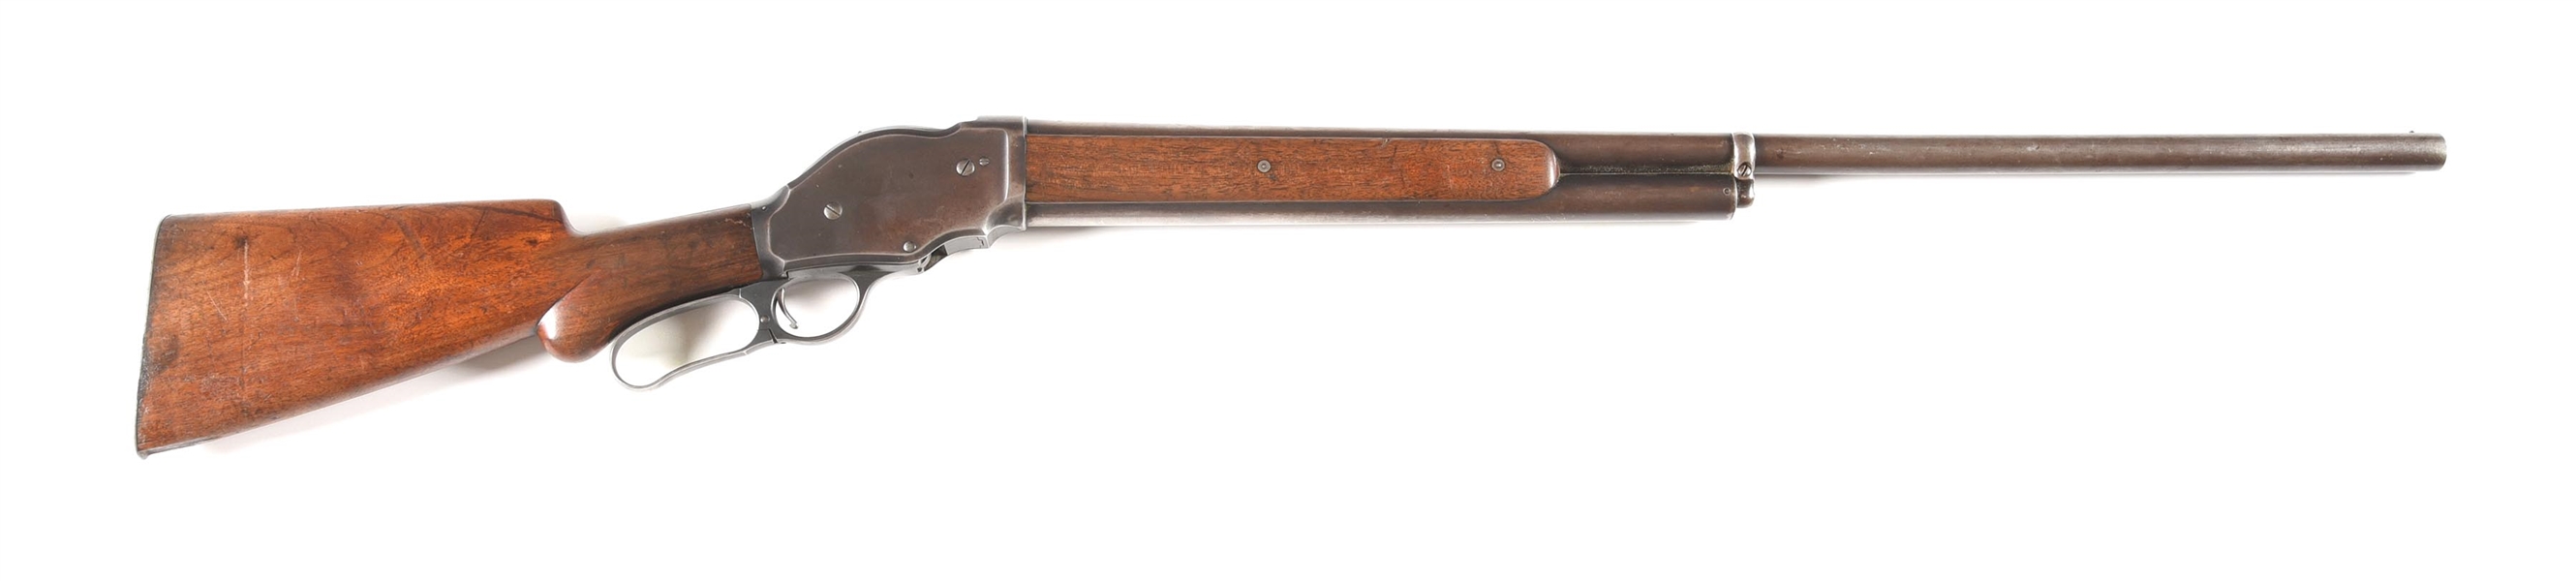 (C) THE SECOND WINCHESTER MODEL 1901 LEVER ACTION SHOTGUN MANUFACTURED.